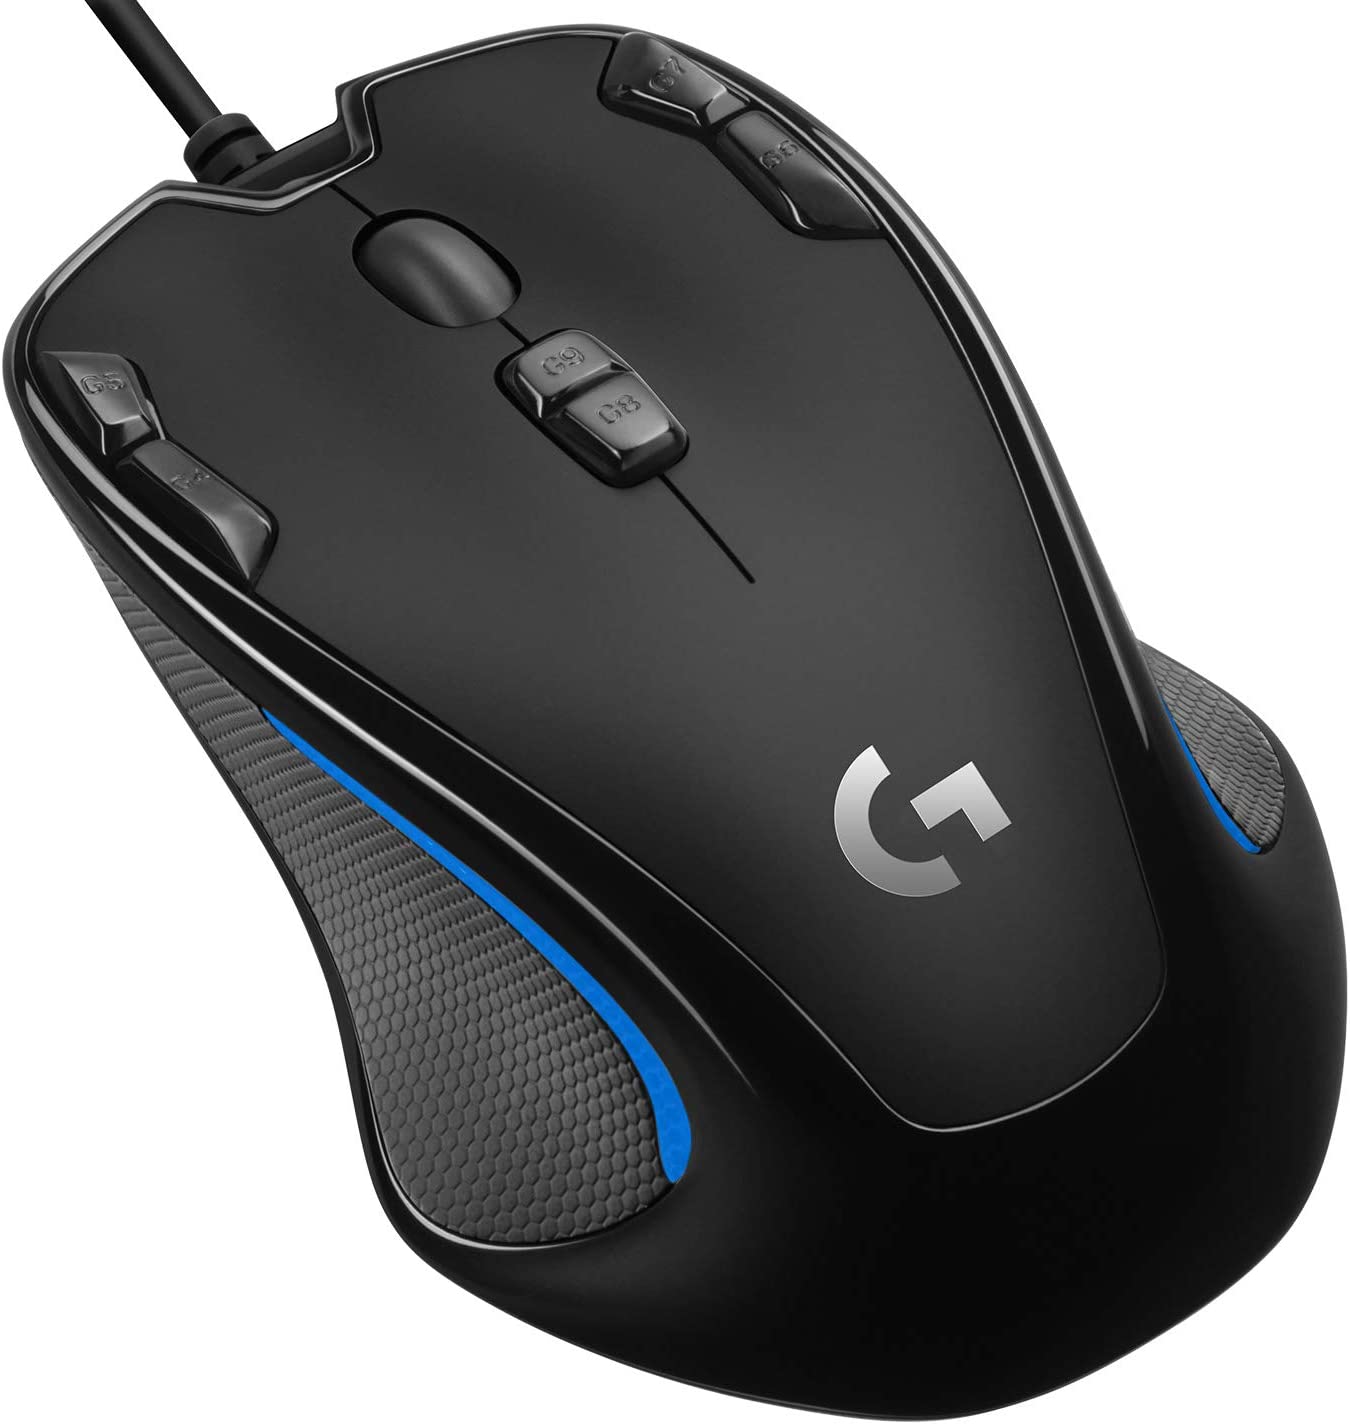 Logitech Gaming Mouse G300s – Mouse – USB